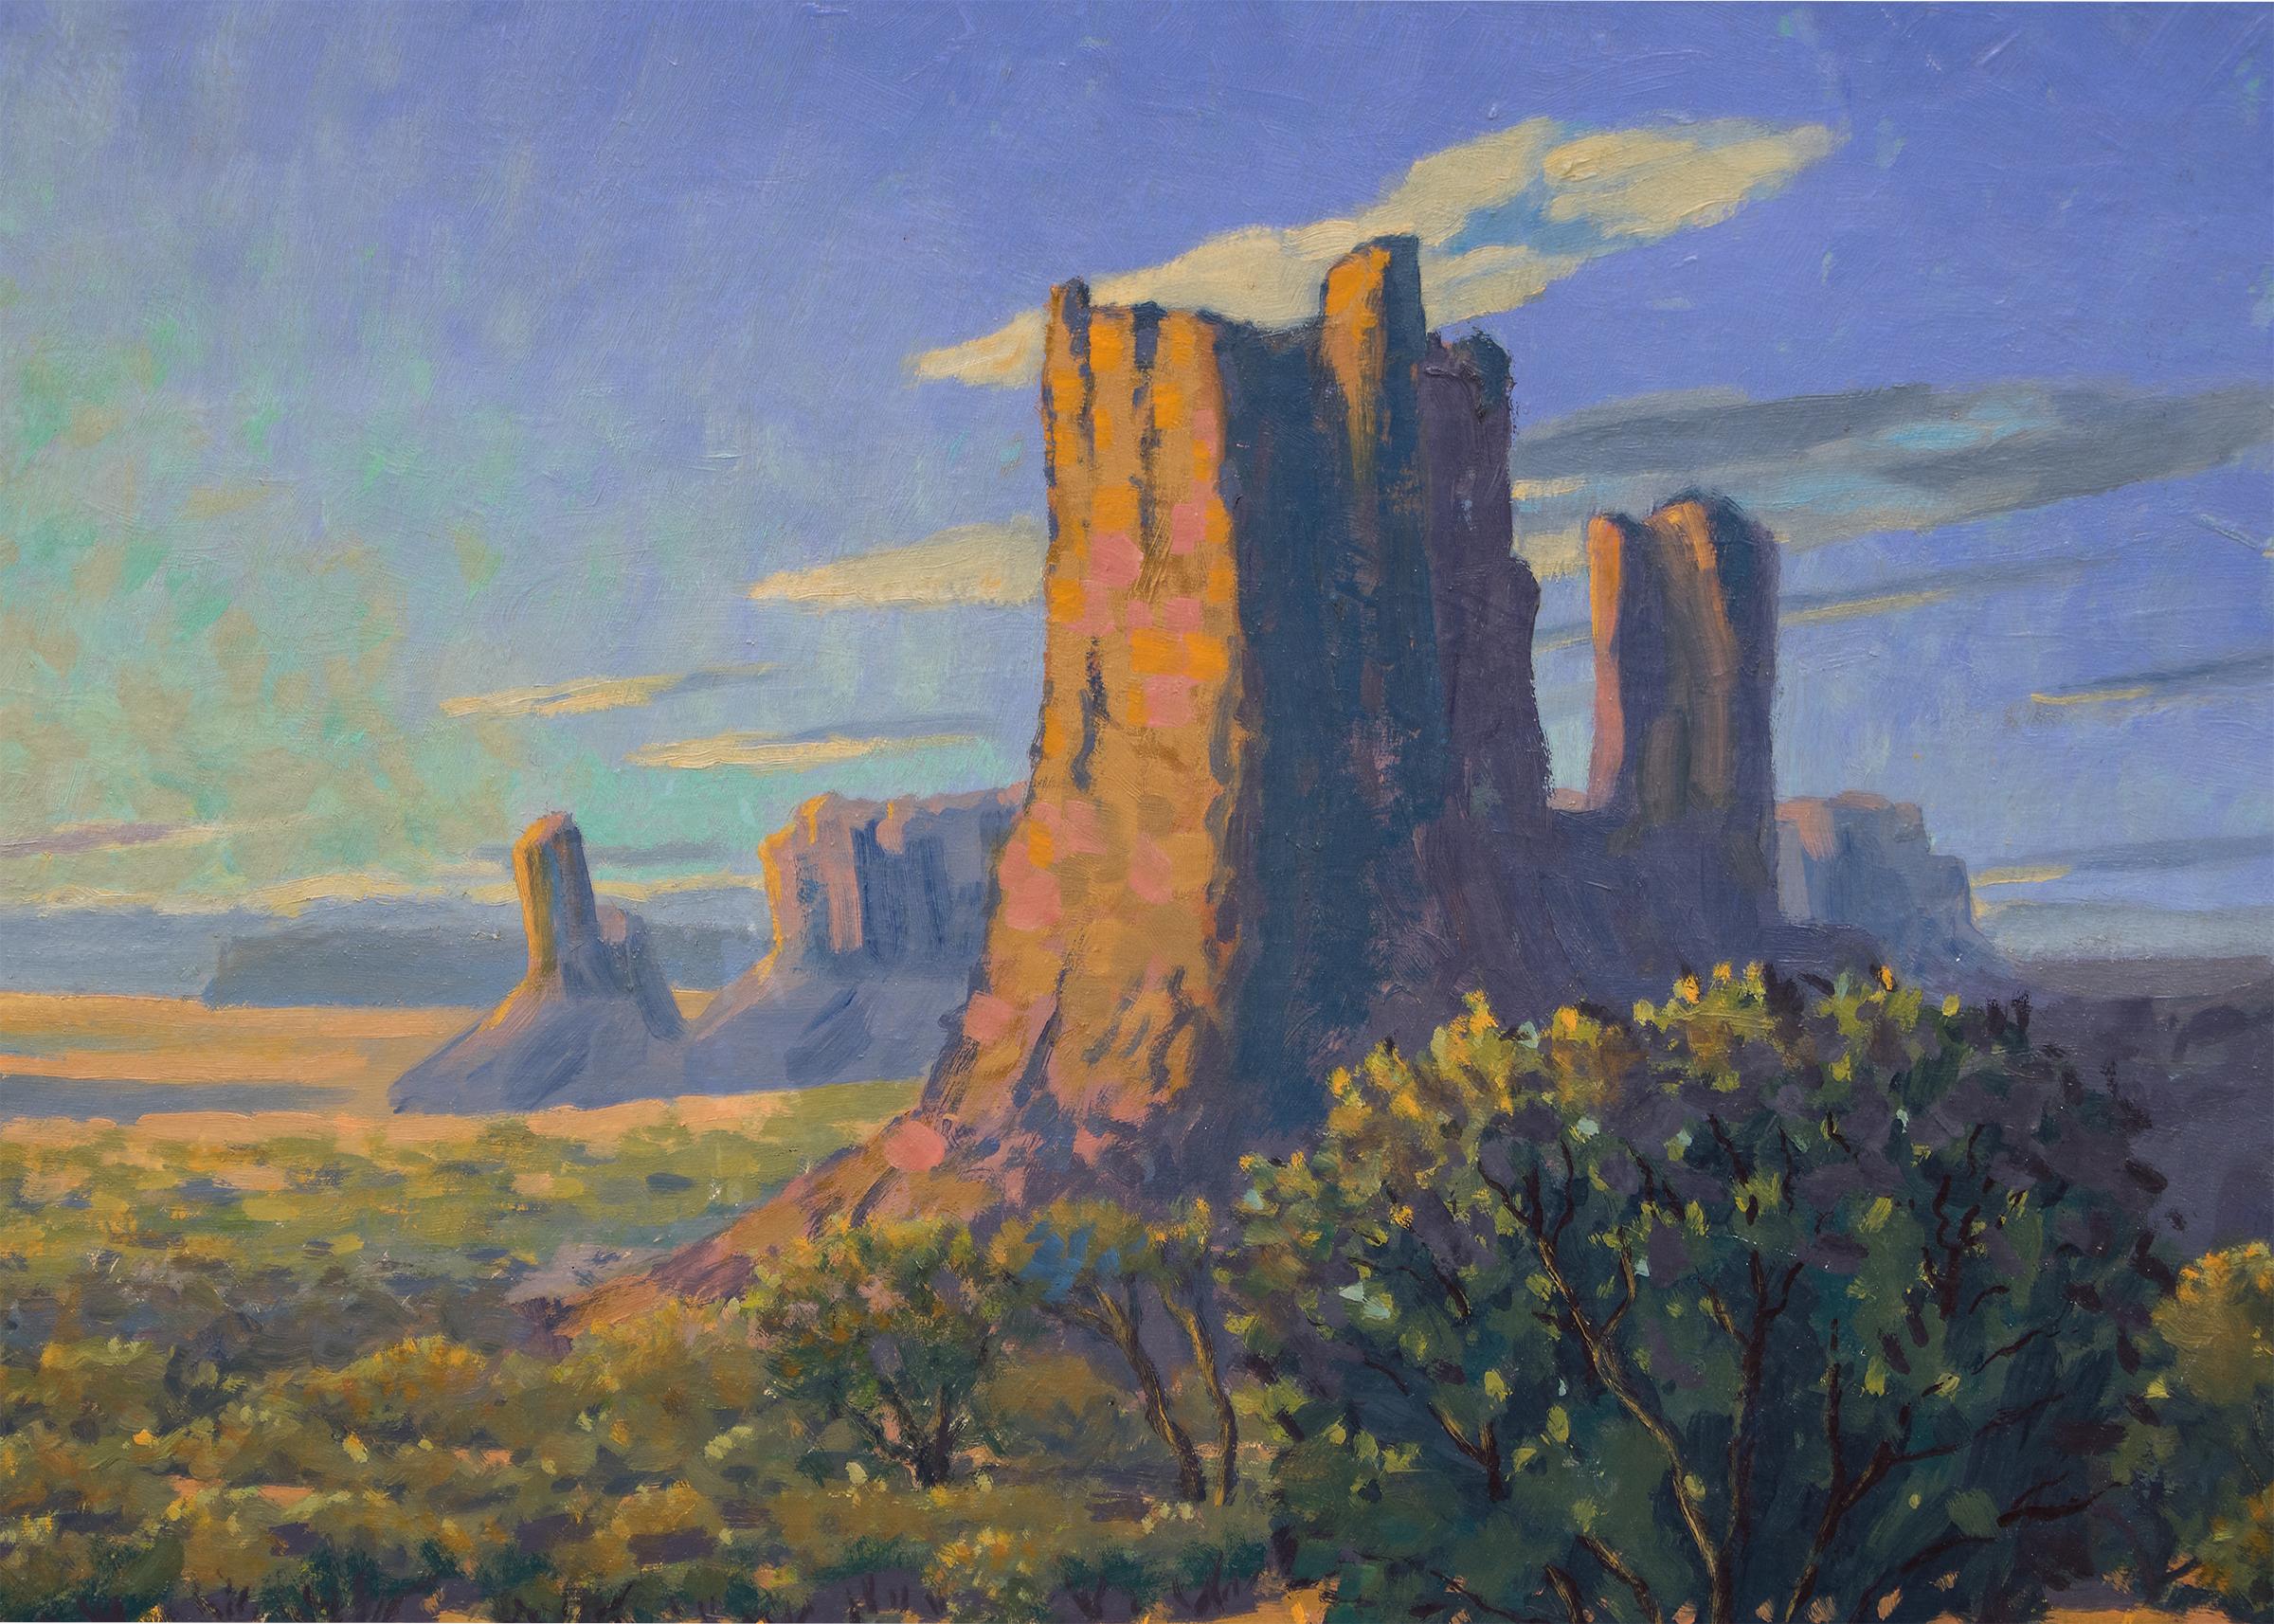 'Monuments: Sunrise', original vintage 1950s oil painting of a southwestern desert landscape in early morning with rock formations, trees and brush with brilliant sky with clouds by Colorado artist, Harold Skene (1883-1978), traditional western